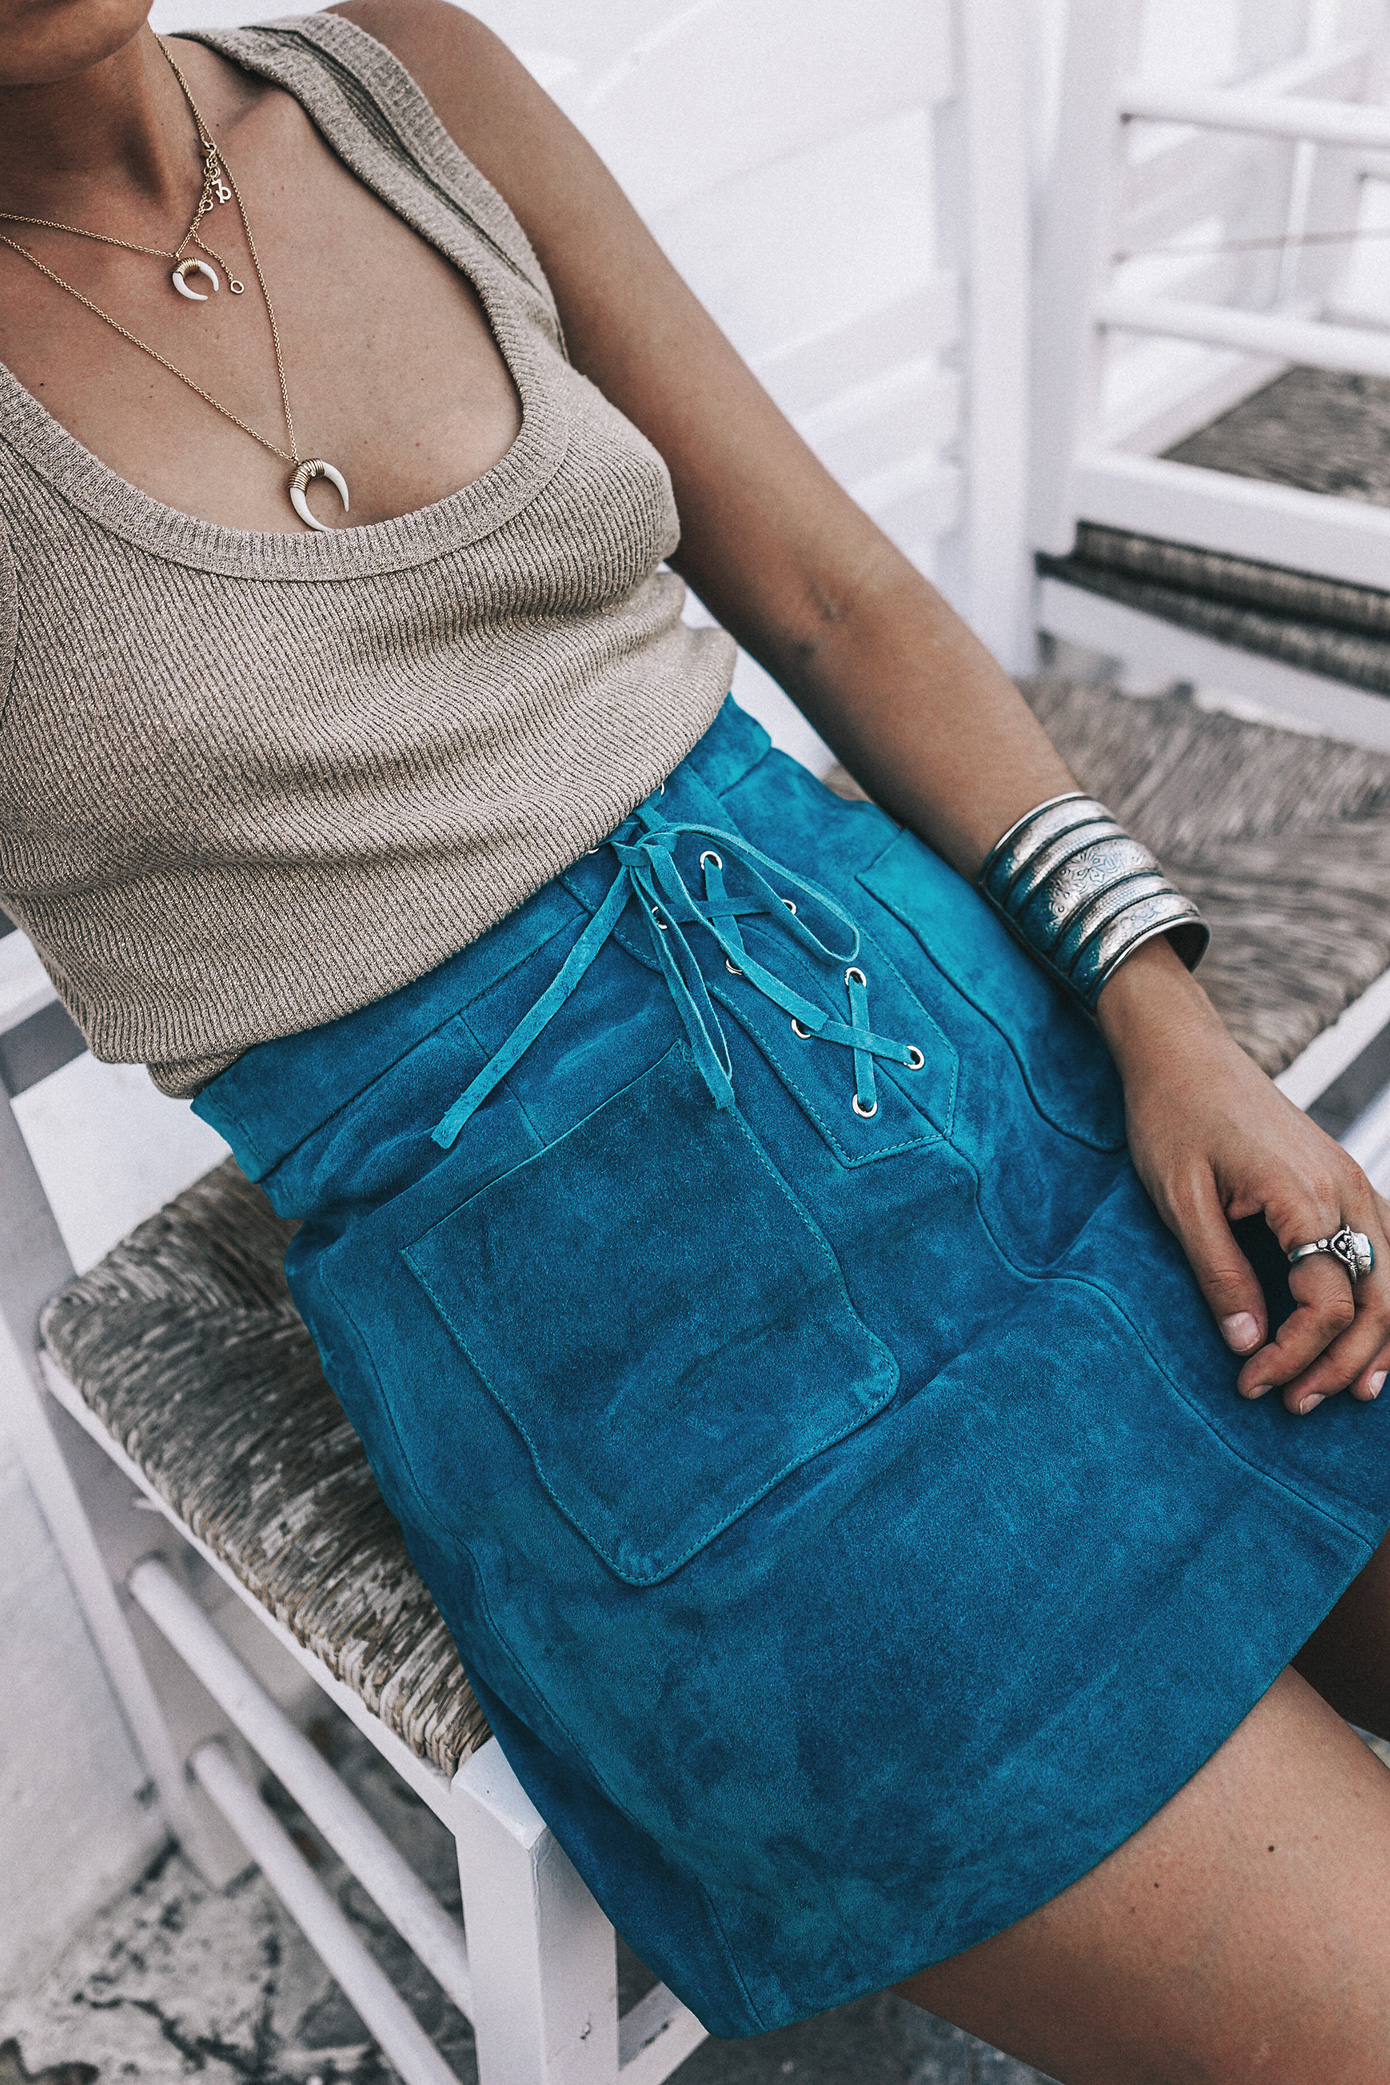 Gold_Top-Metallic_Trend-Suede_Skirt-Turquoise_Skirt-Soludos_Espadrilles-Soludos_Escapes-Mykonos-Greece-Collage_Vintage-Street_Style-144